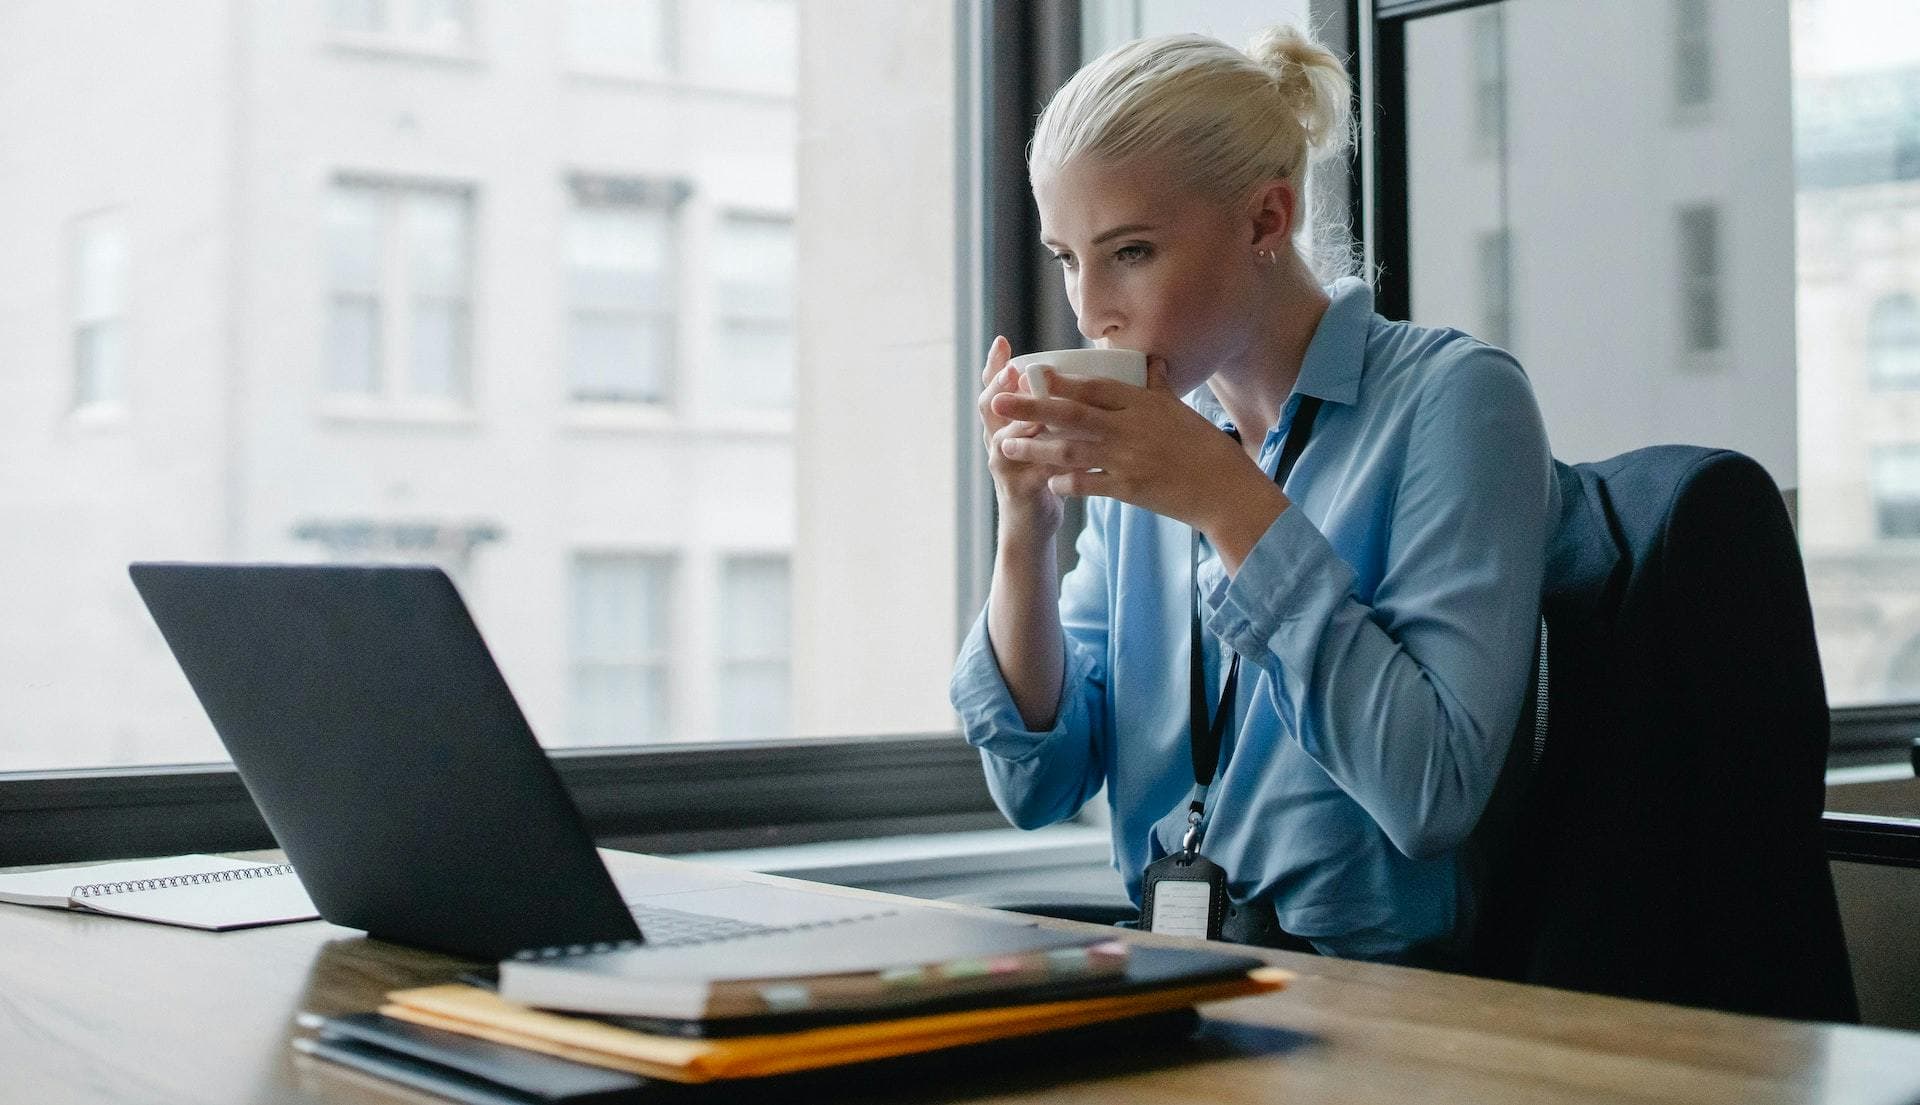 Female entrepreneur in blue shirt drinking coffee at desk in front of laptop